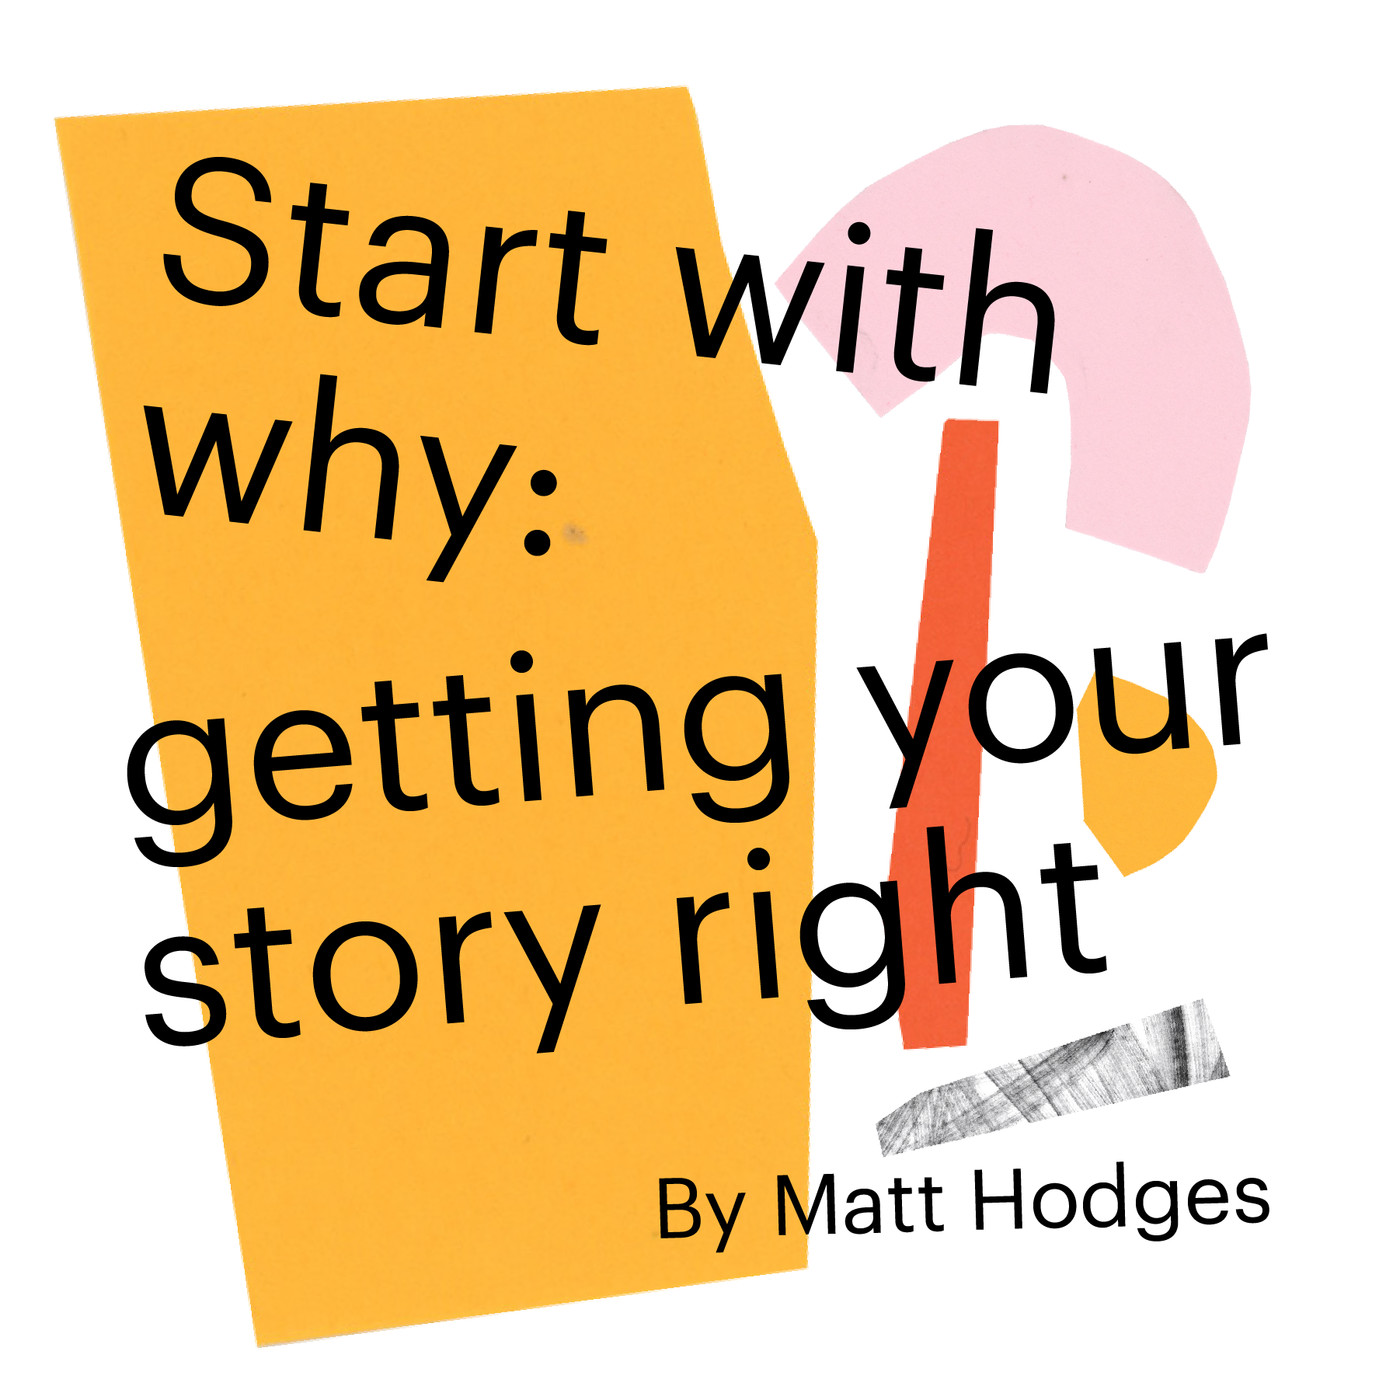 Chapter 2: Getting your story right